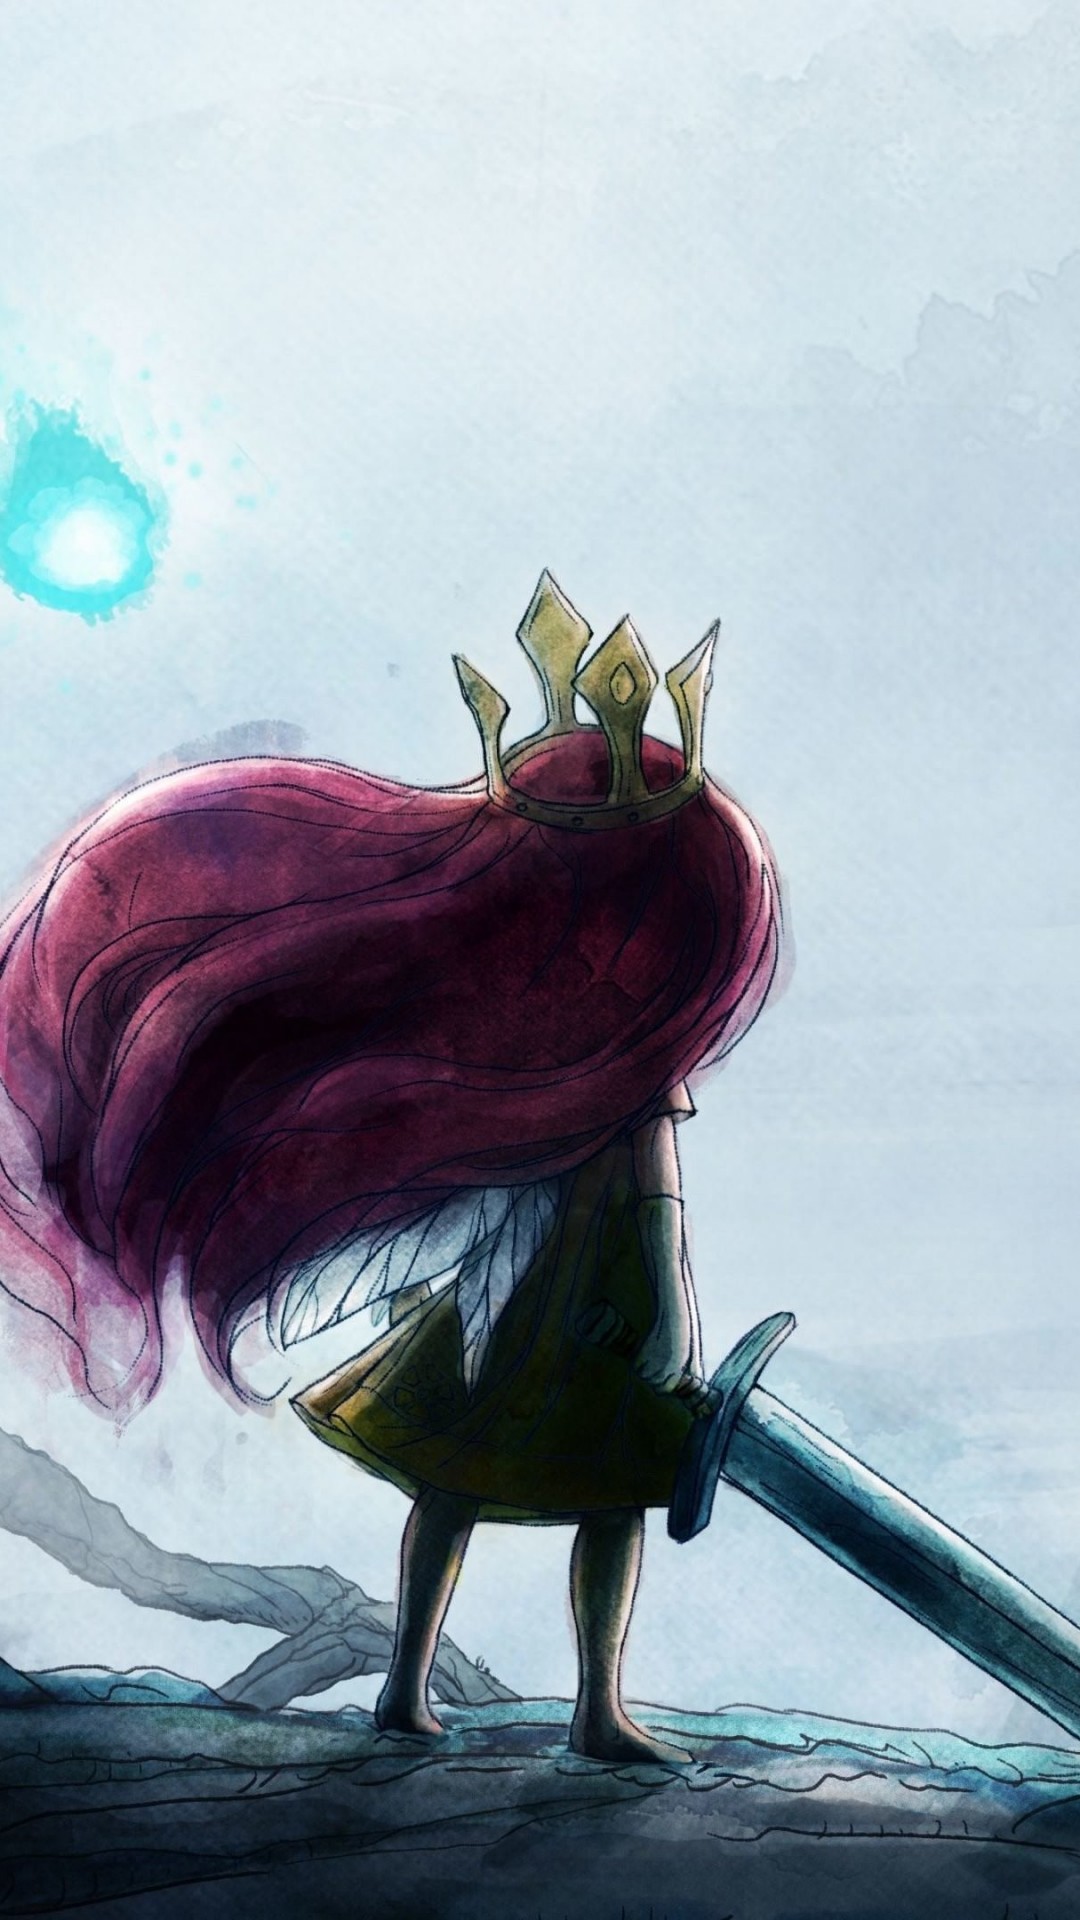 Child Of Light Wallpaper for SONY Xperia Z2